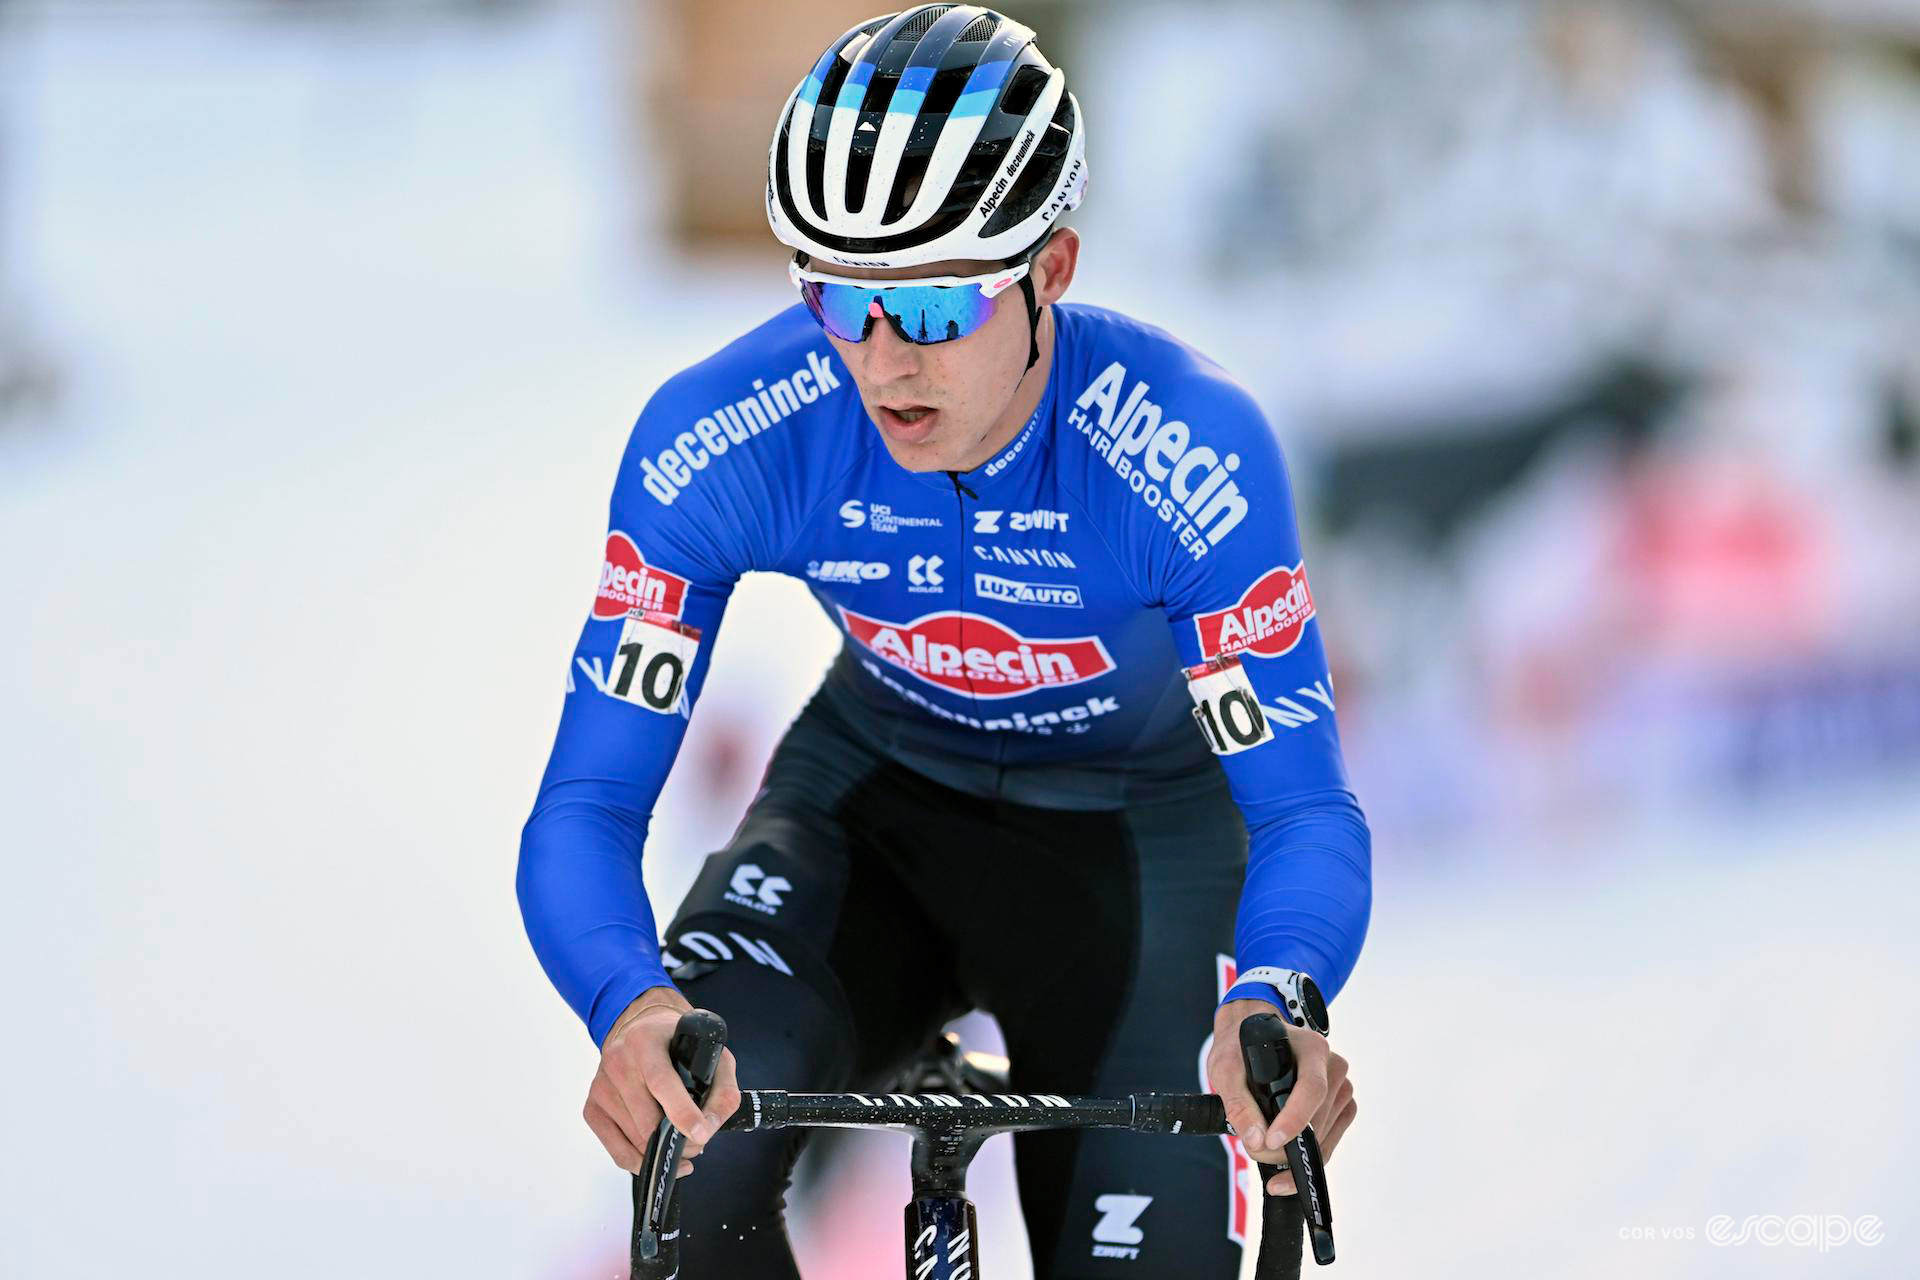 Niels Vandeputte during UCI Cyclocross World Cup Val di Sole.